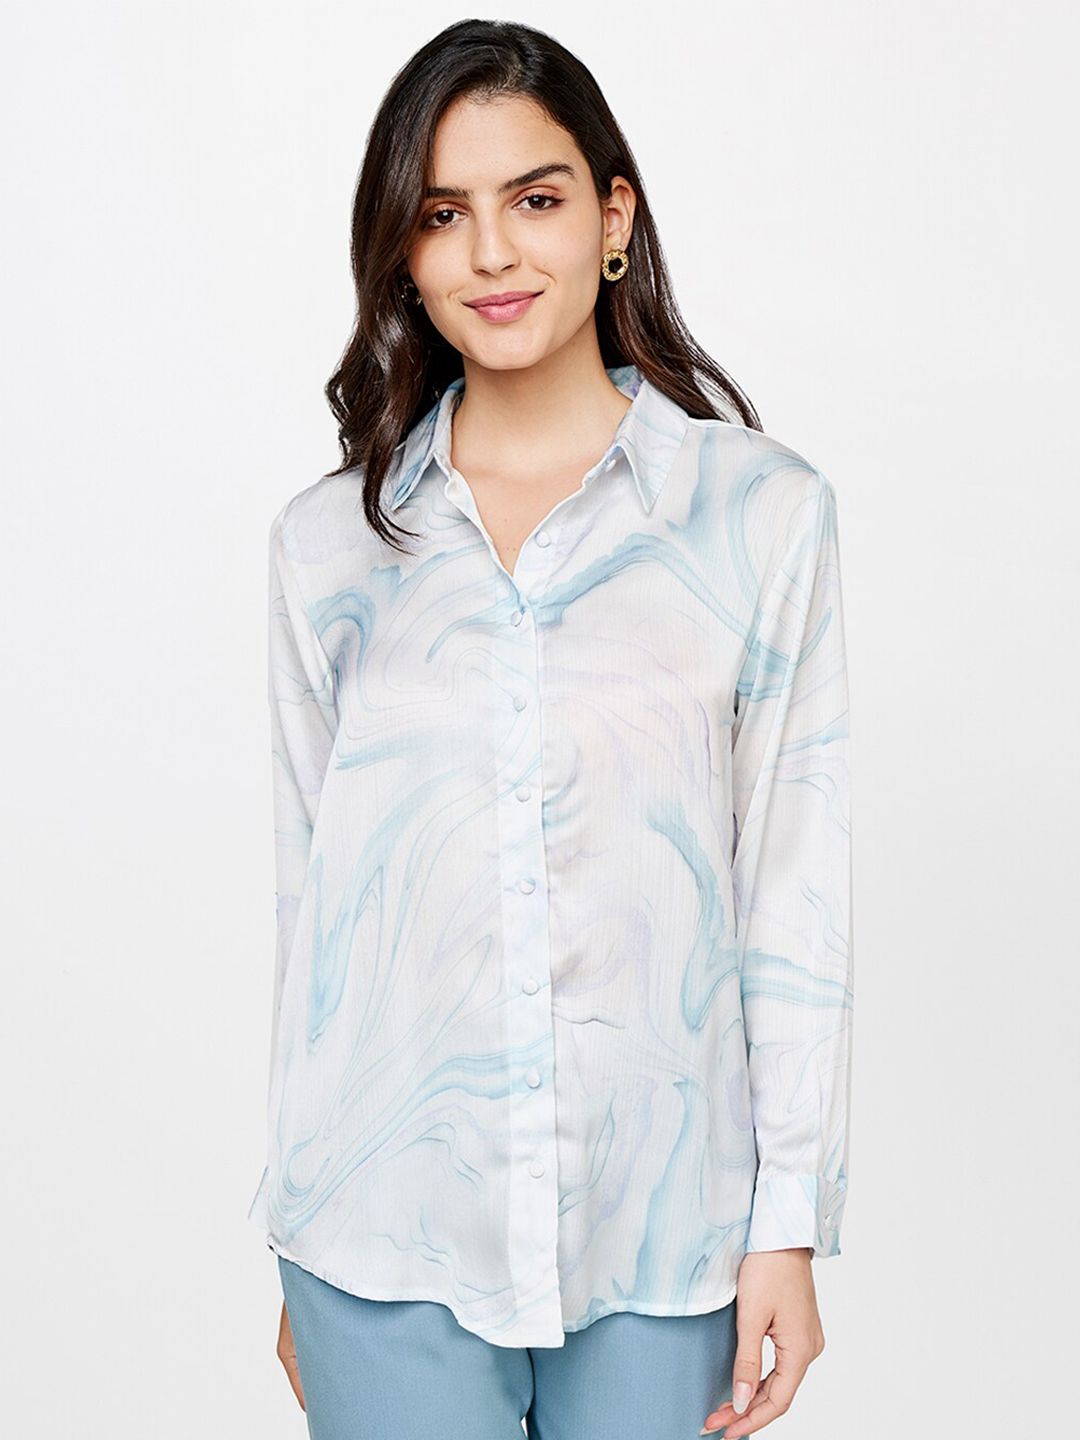 AND Women White & Blue Printed Shirt Style Top Price in India